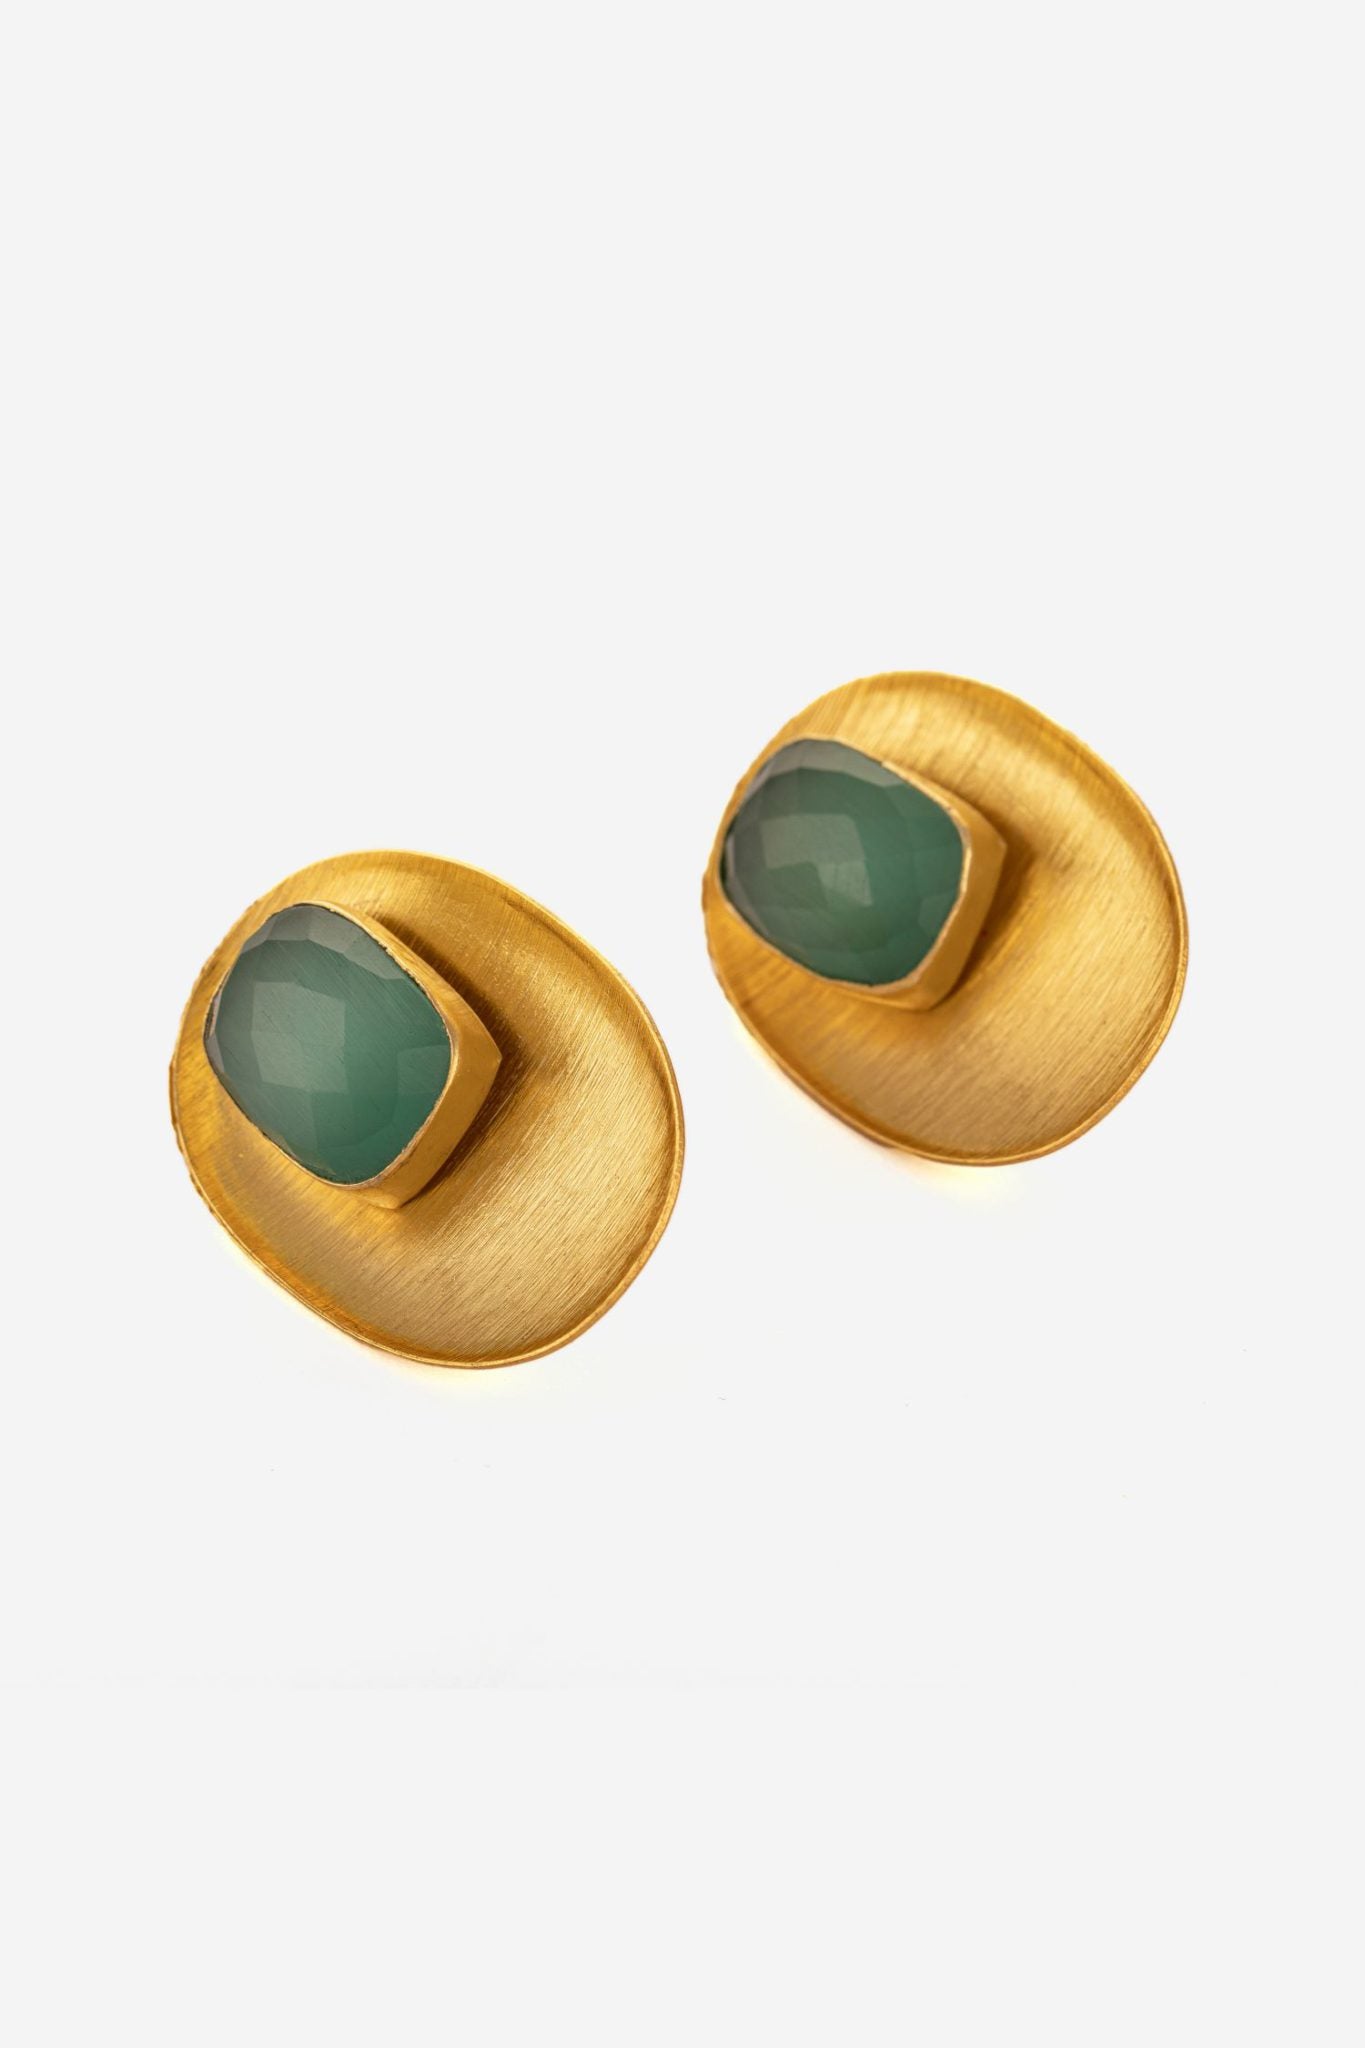 Oval Shaped Green And Golden Colour Earrings